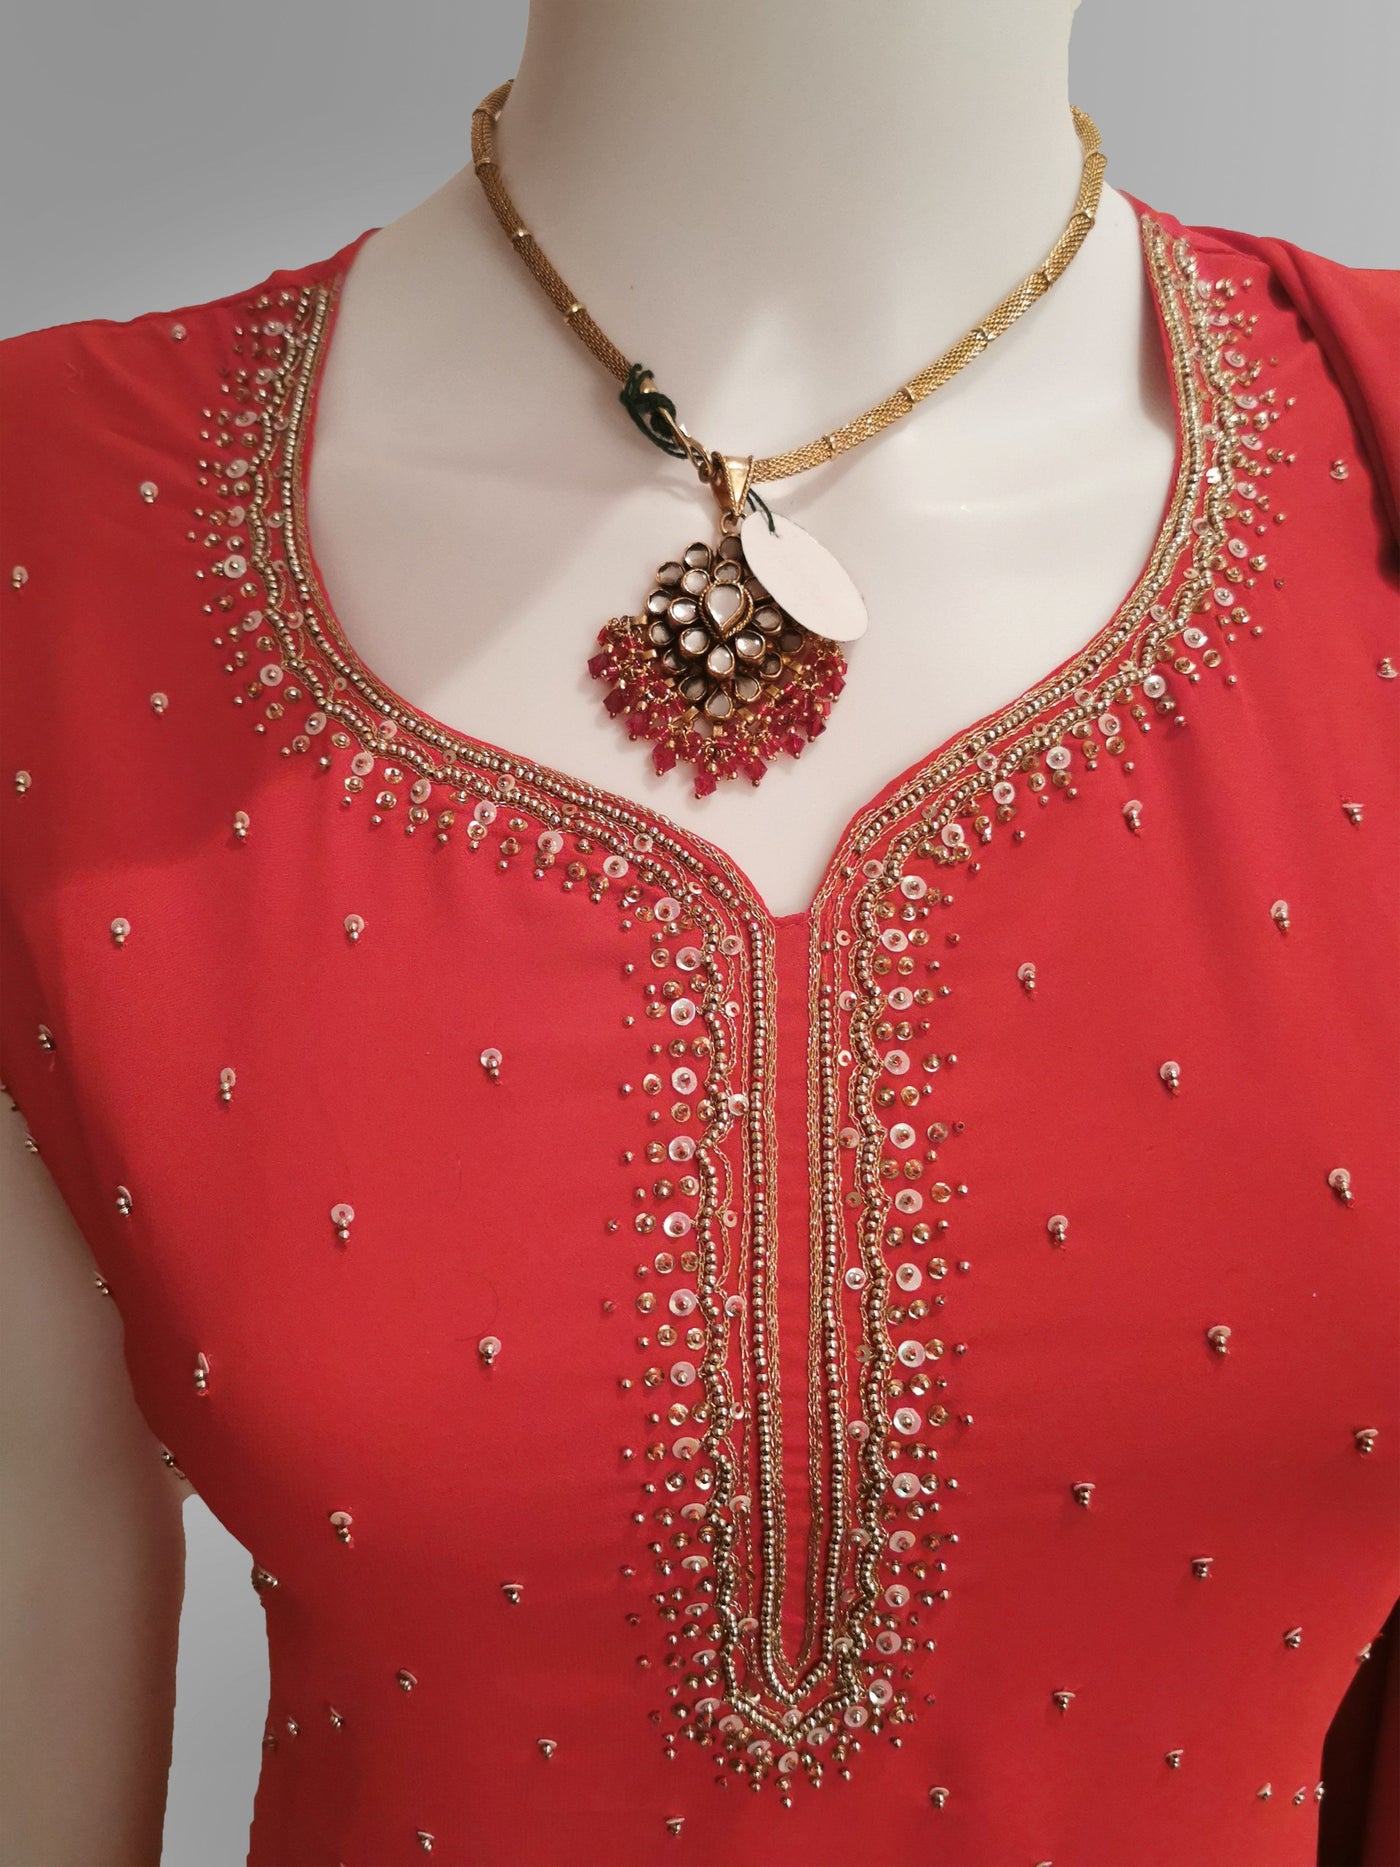 Salwar-Kameez in Tomato Red Crepe with Light Gold Embroidery - Indian Clothing in Denver, CO, Aurora, CO, Boulder, CO, Fort Collins, CO, Colorado Springs, CO, Parker, CO, Highlands Ranch, CO, Cherry Creek, CO, Centennial, CO, and Longmont, CO. Nationwide shipping USA - India Fashion X